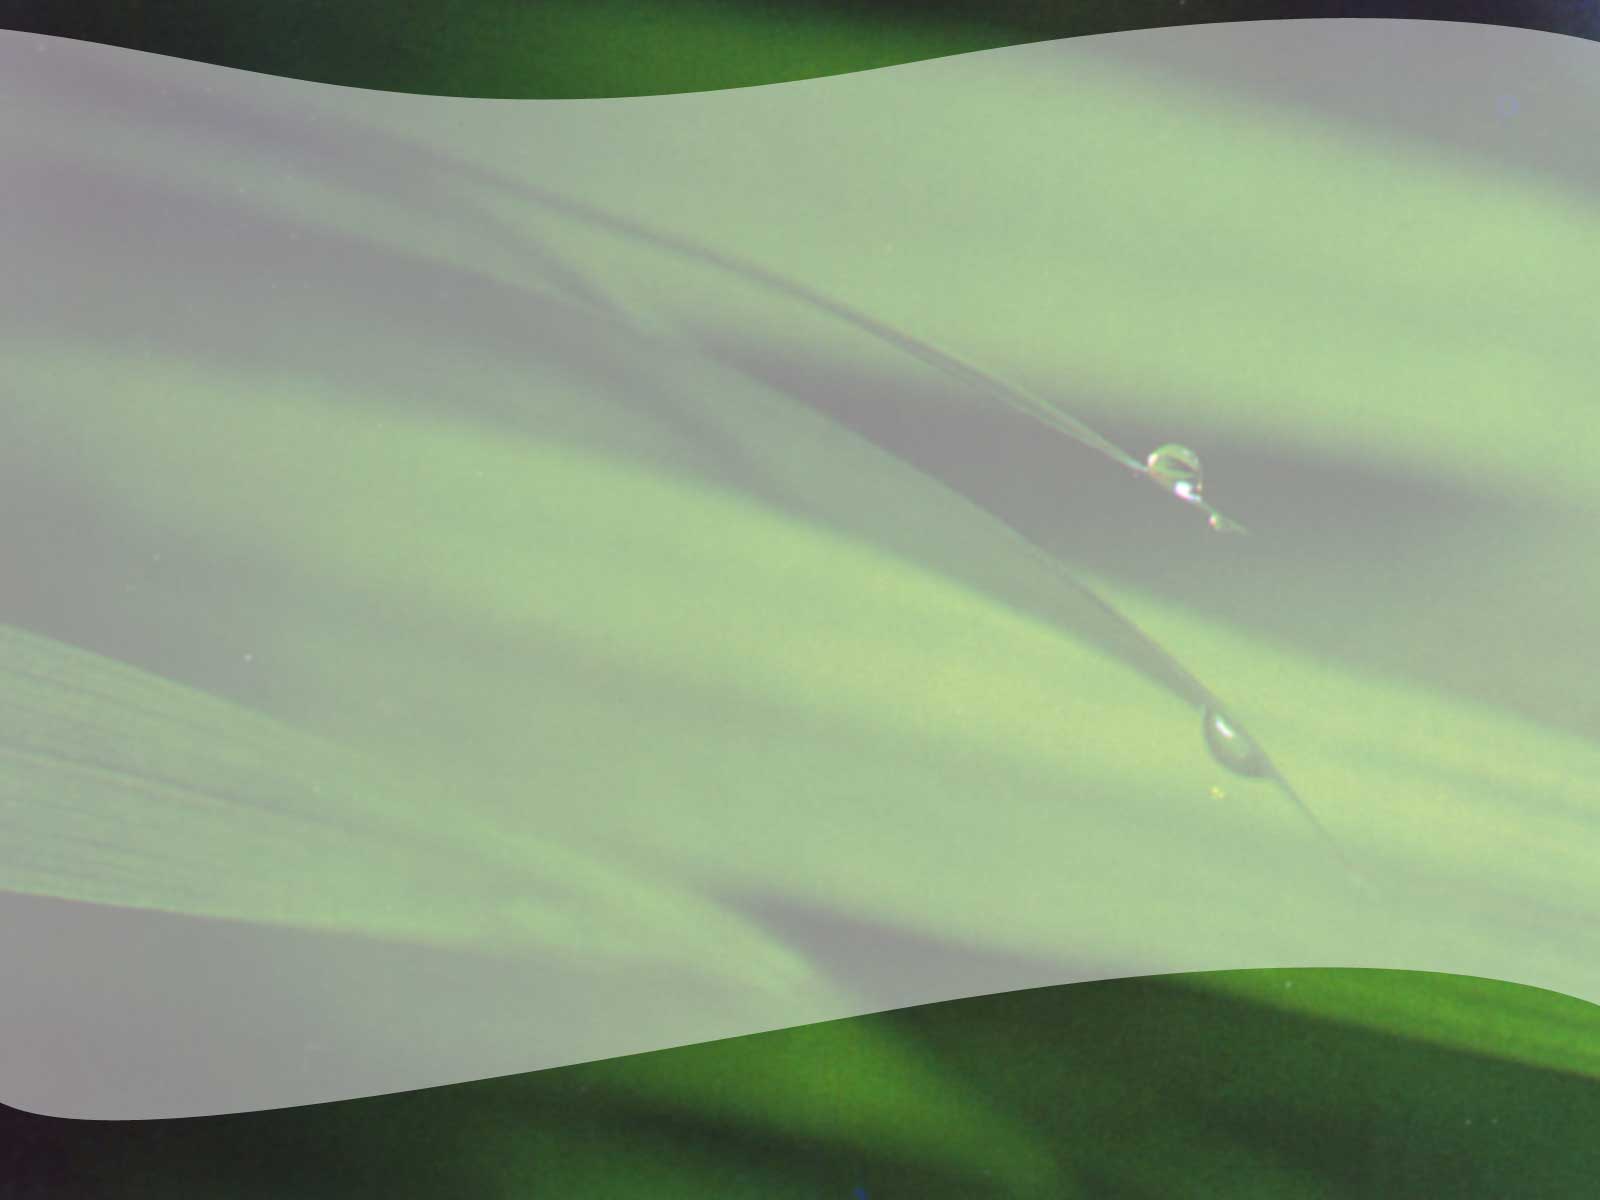 Water Drop theme, one of our nature theme, for PowerPoint backgrounds, 